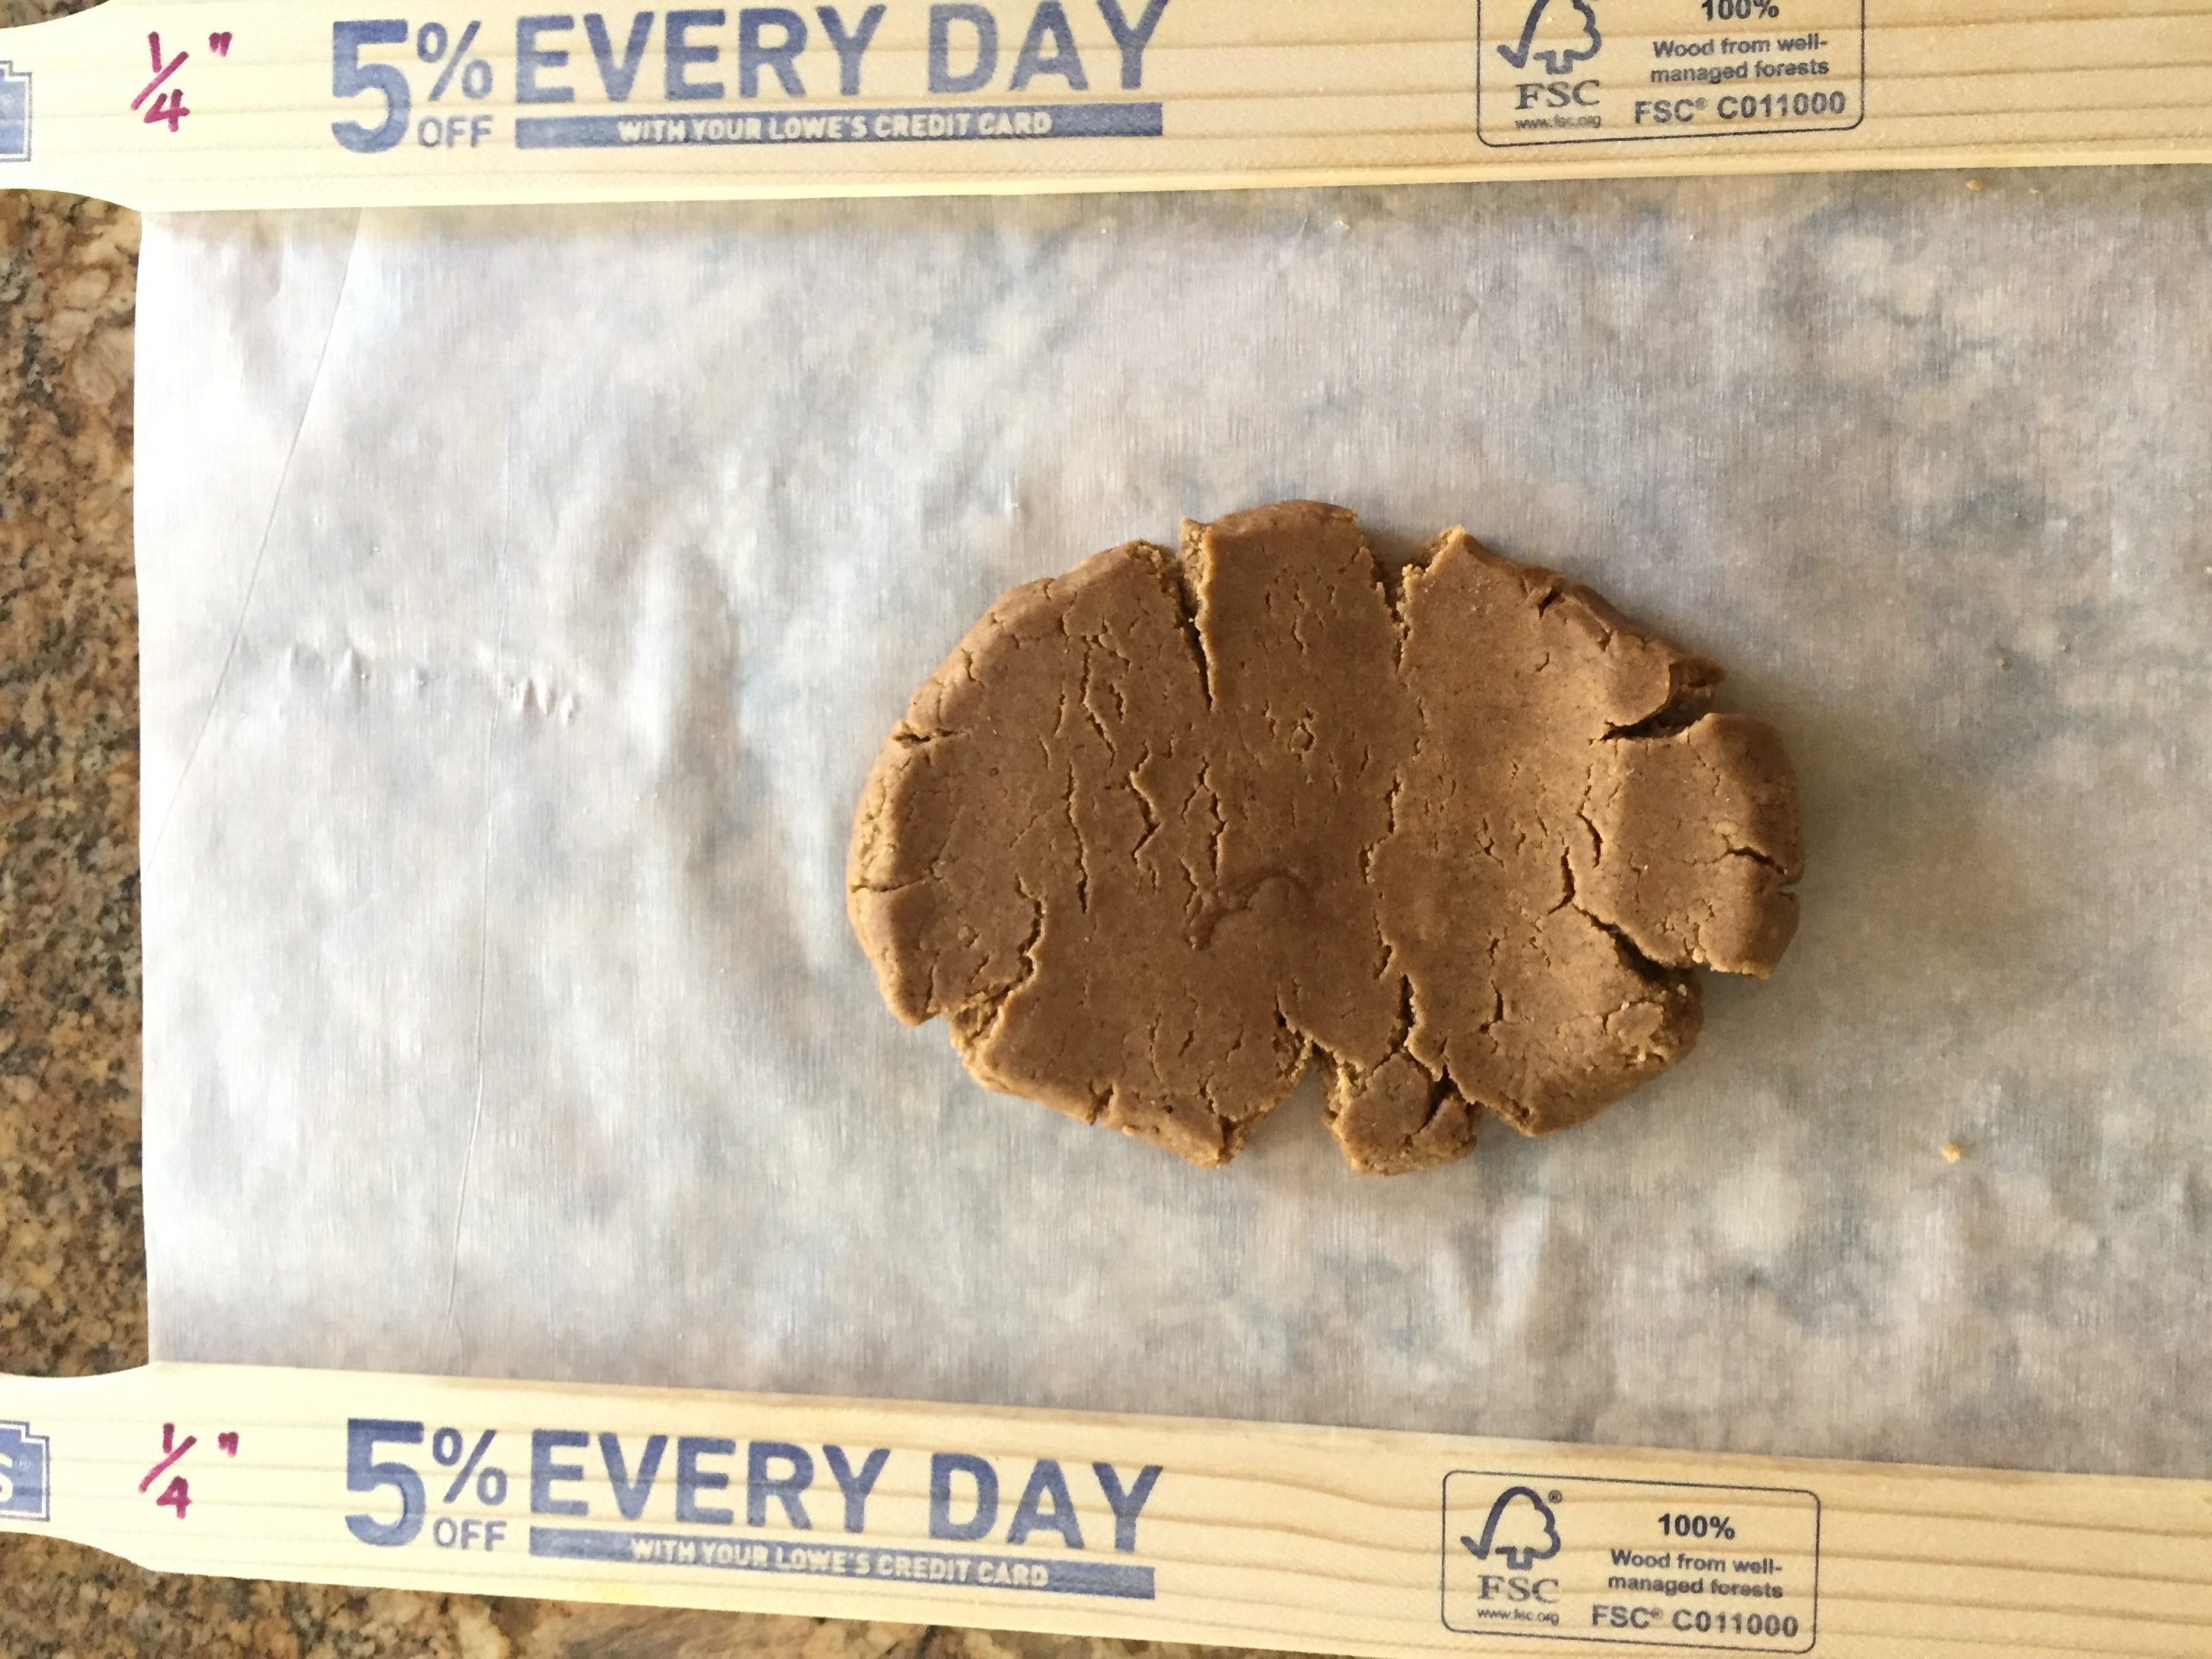 Use parchment paper when rolling cookies to prevent sticking